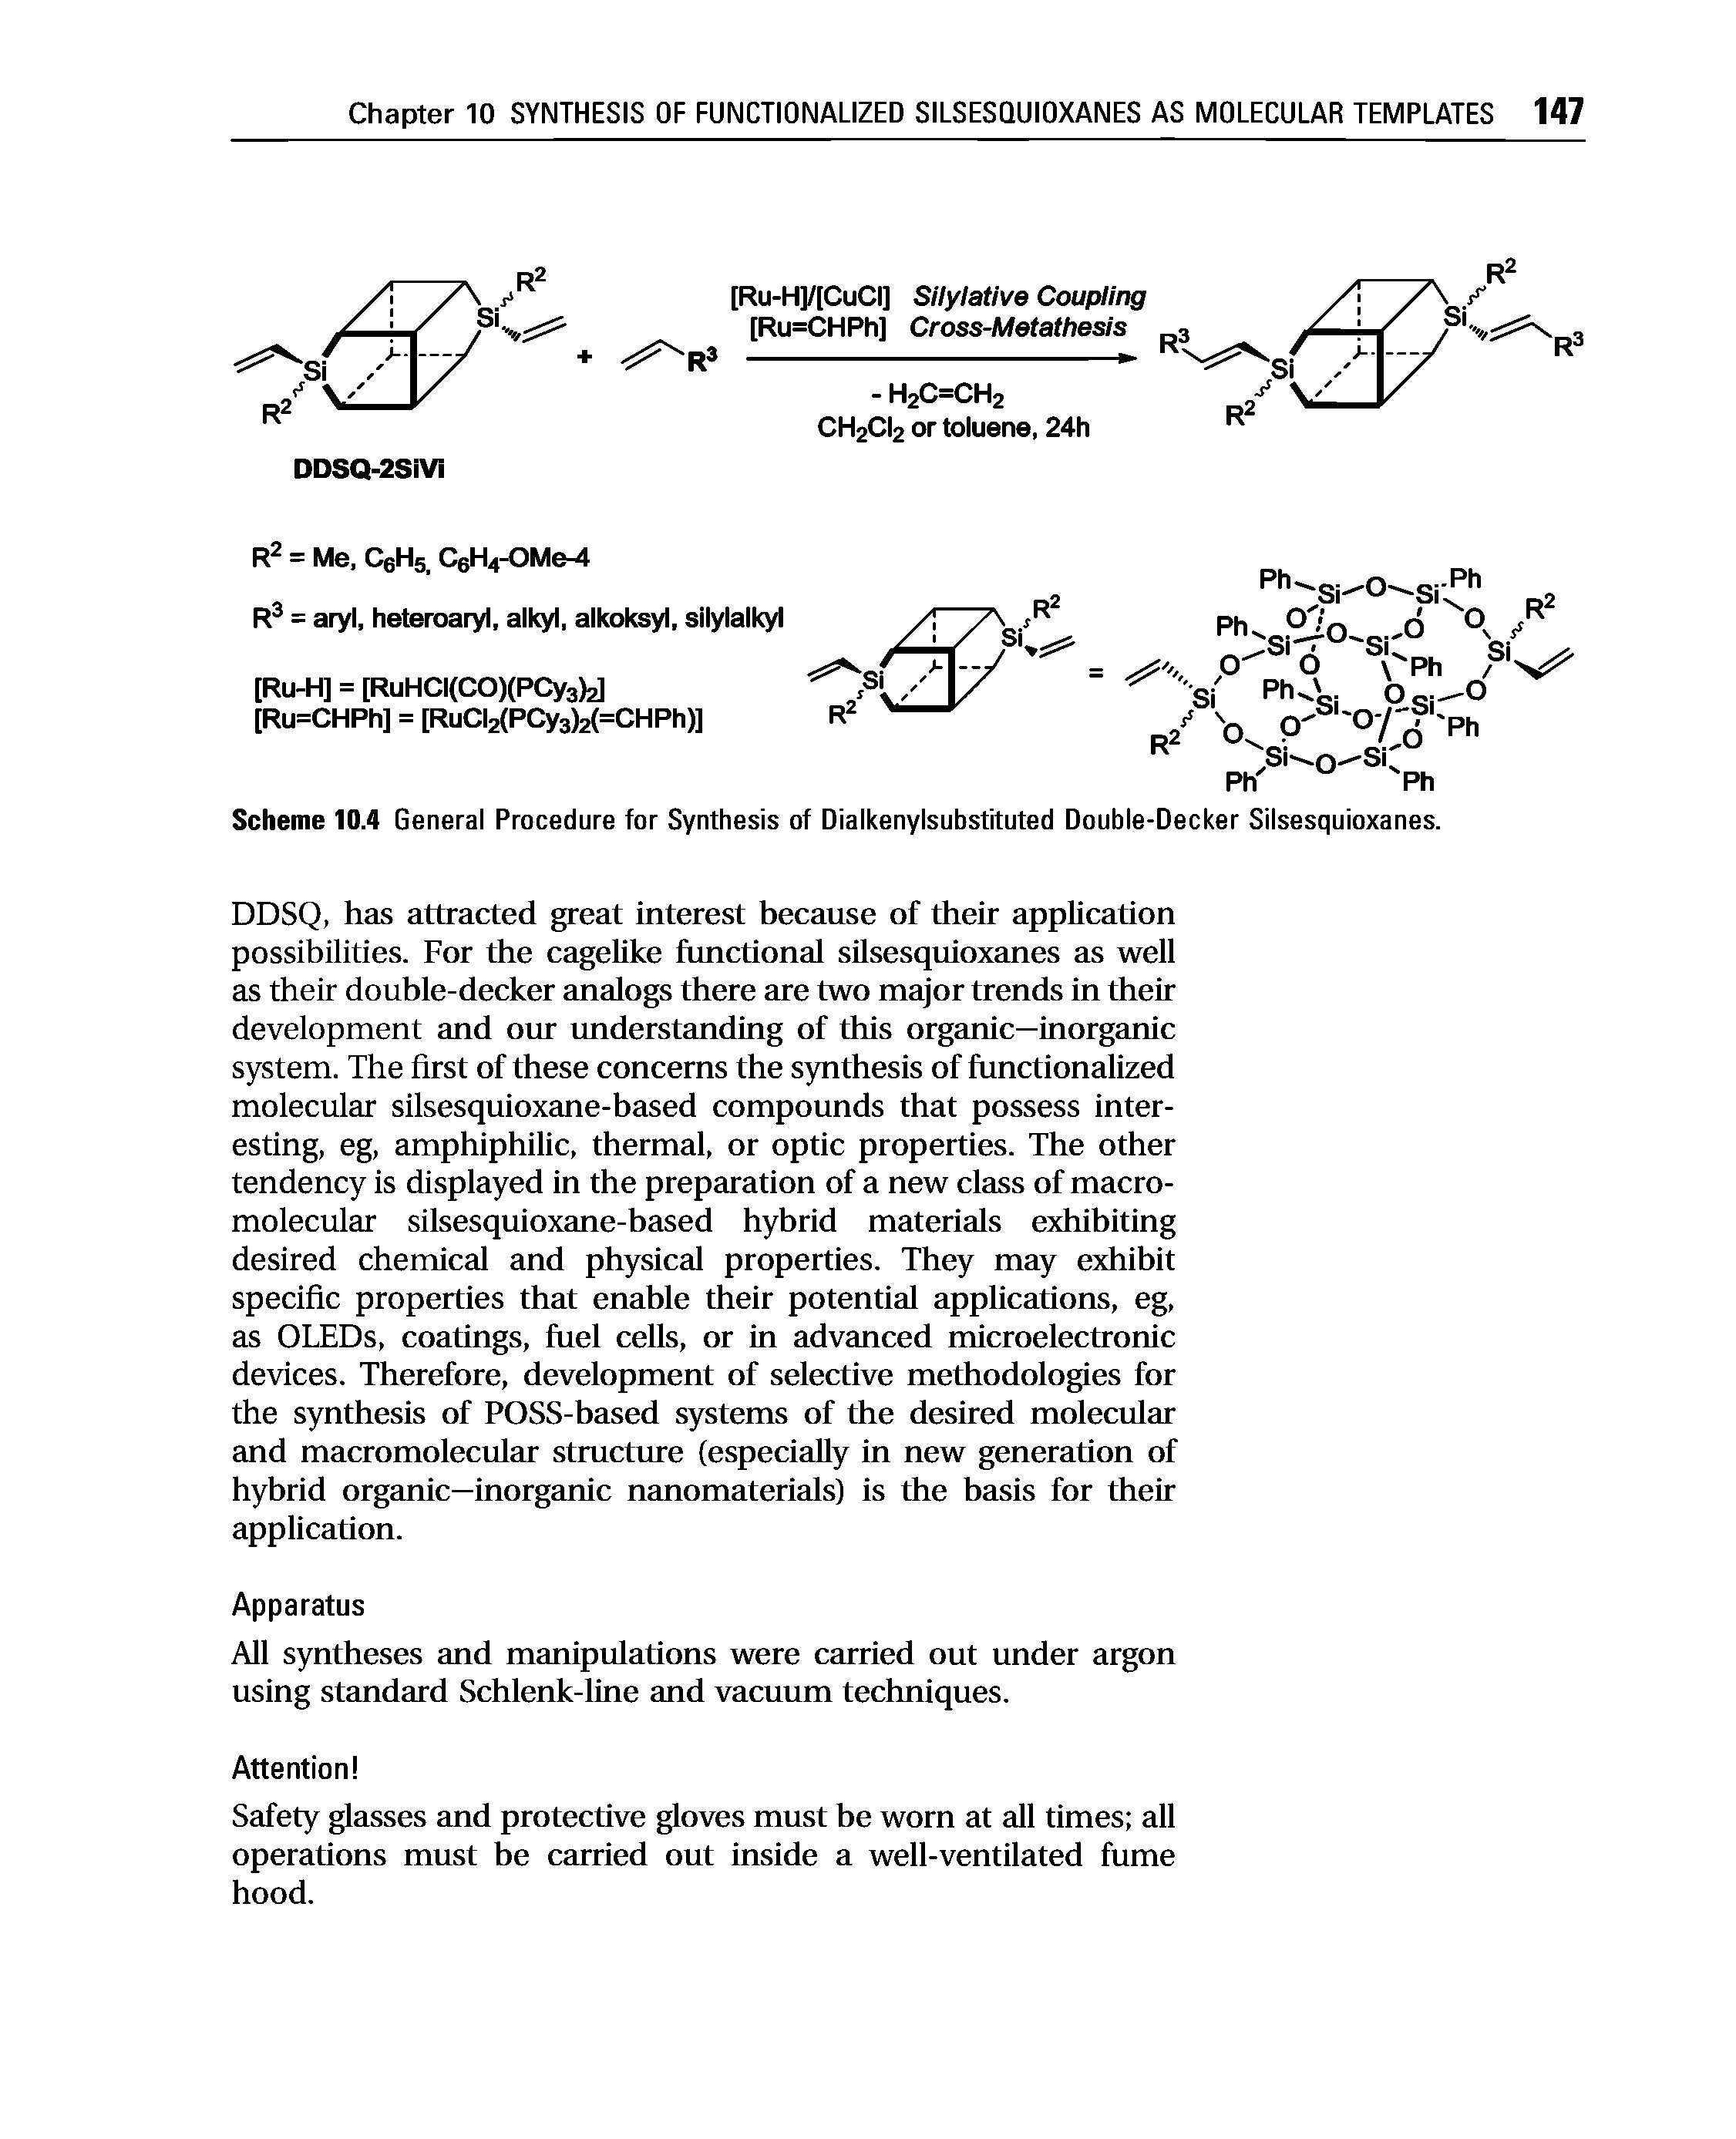 Scheme 10.4 General Procedure for Synthesis of Dialkenylsubstituted Double-Decker Silsesquioxanes.